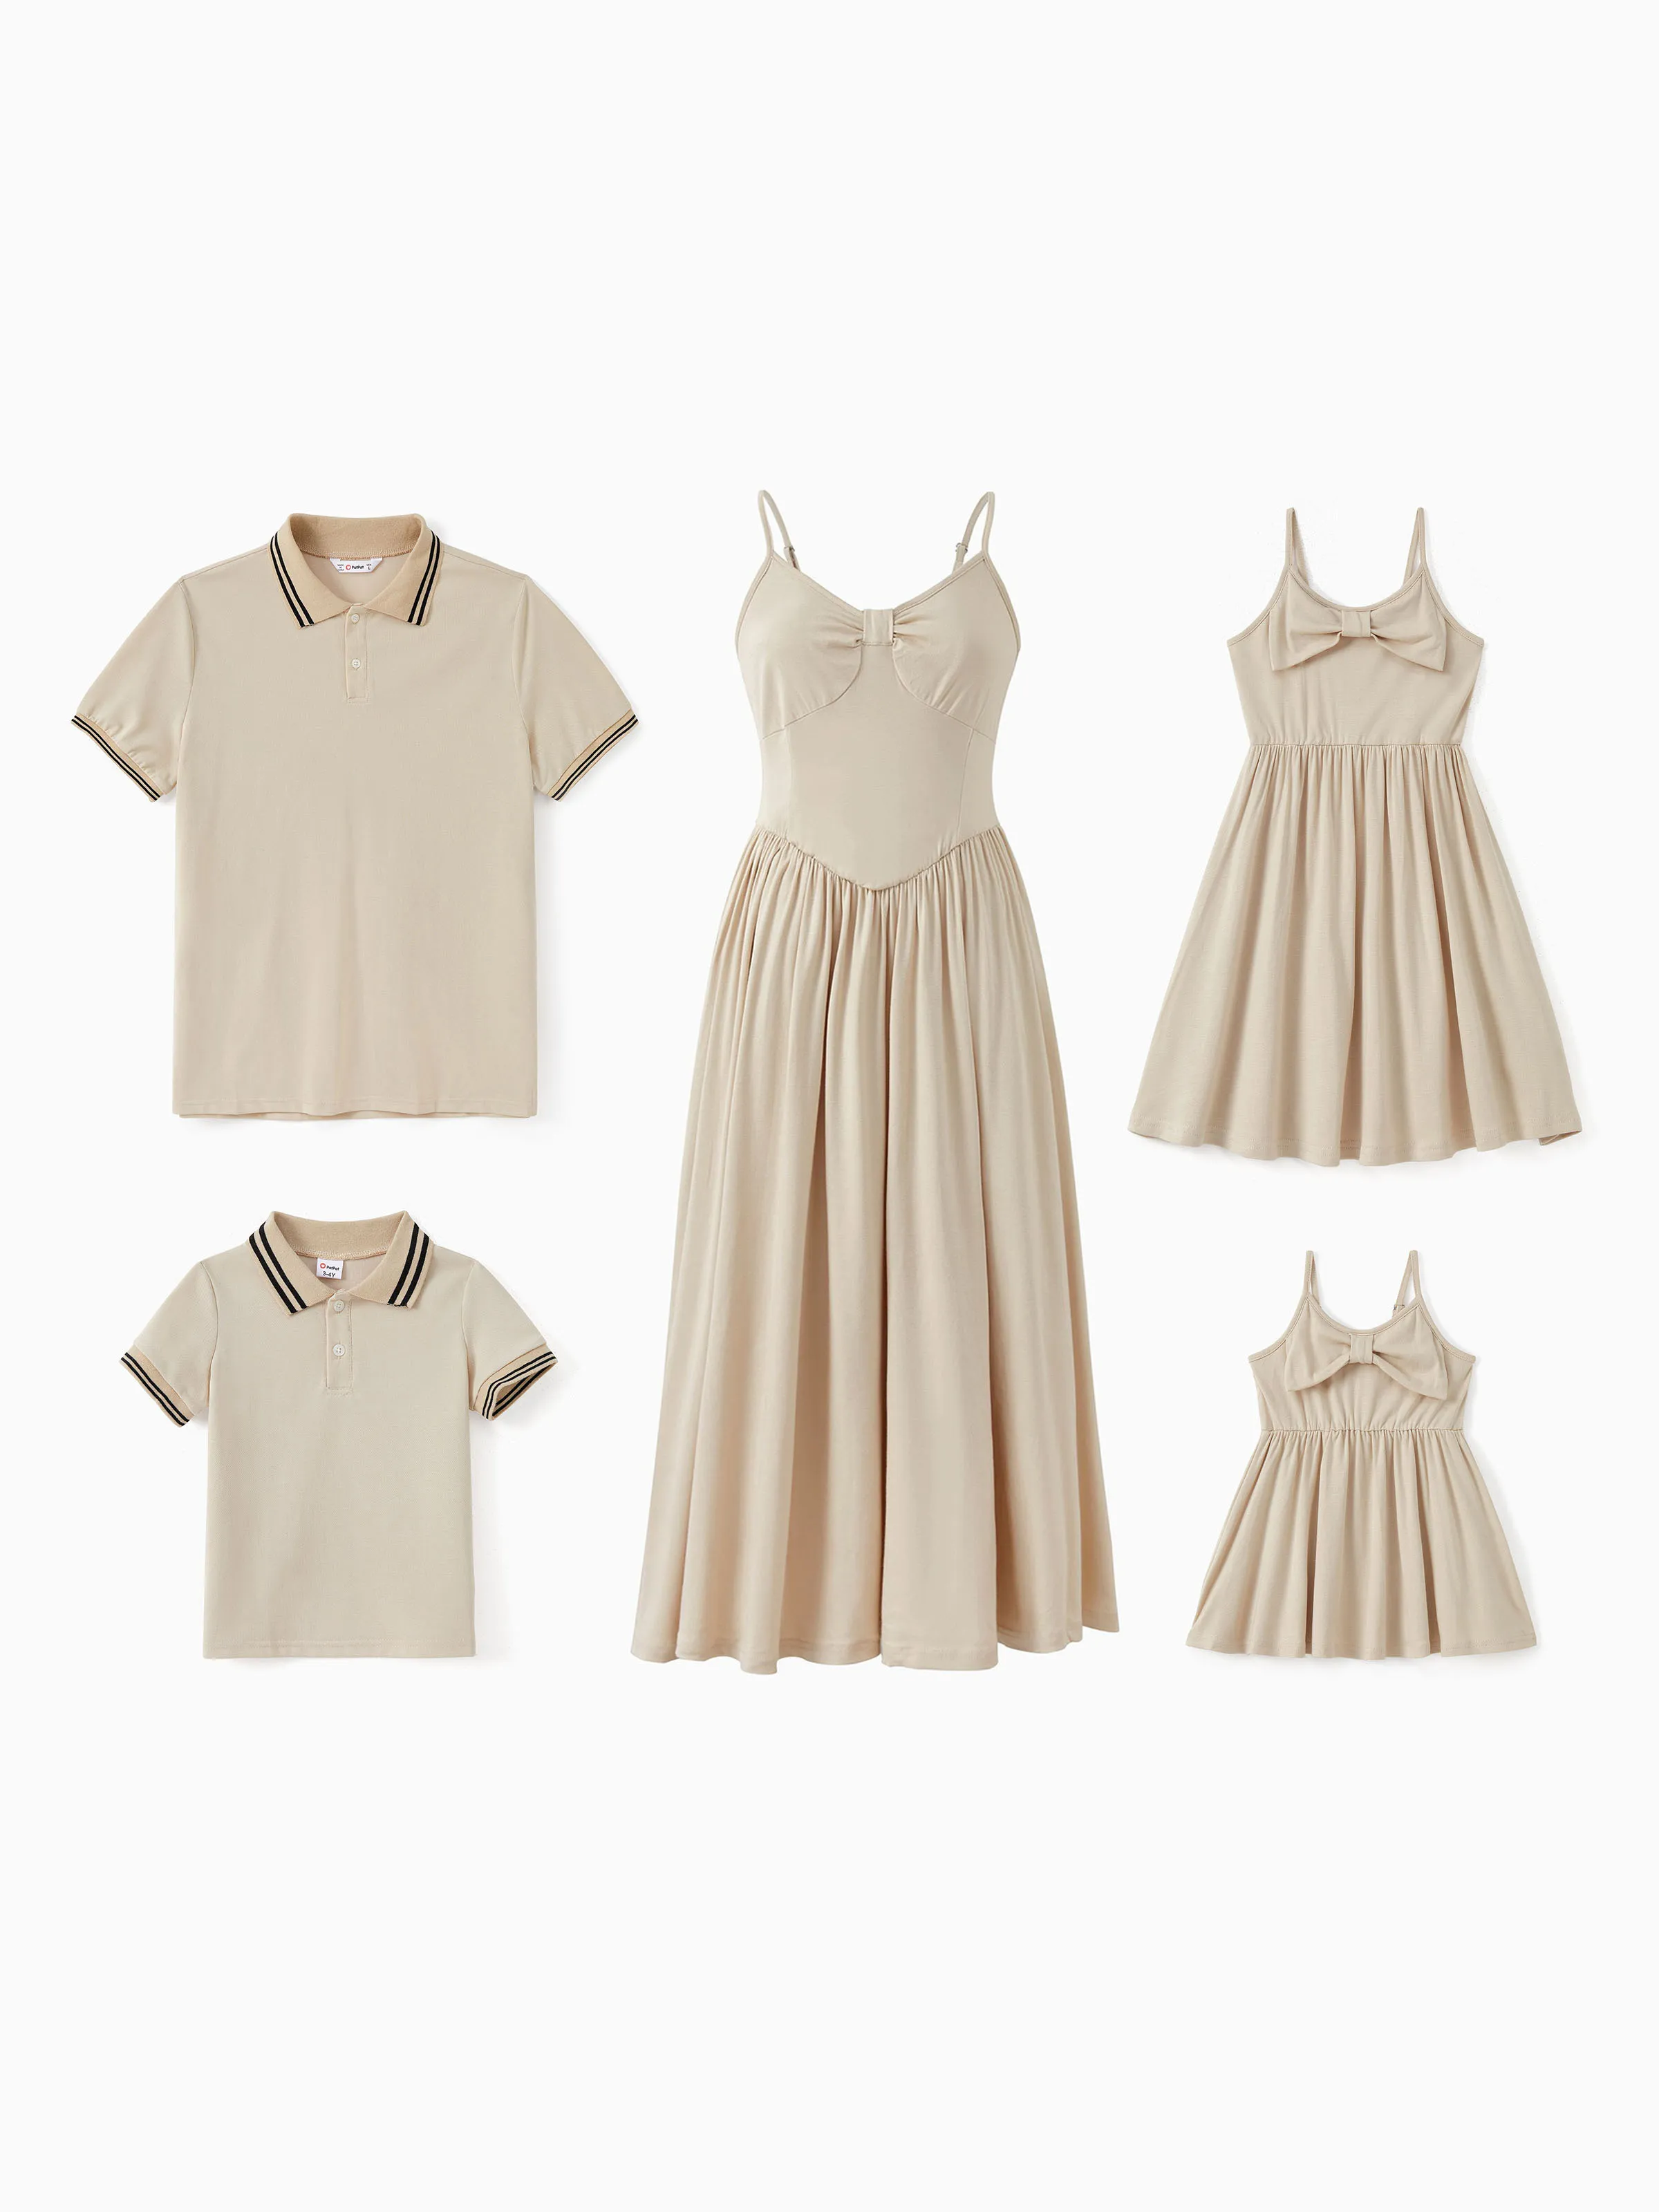 

Family Matching Light Apricot Polo Shirt or Bow Design Flowy A-Line Strap Dress Sets